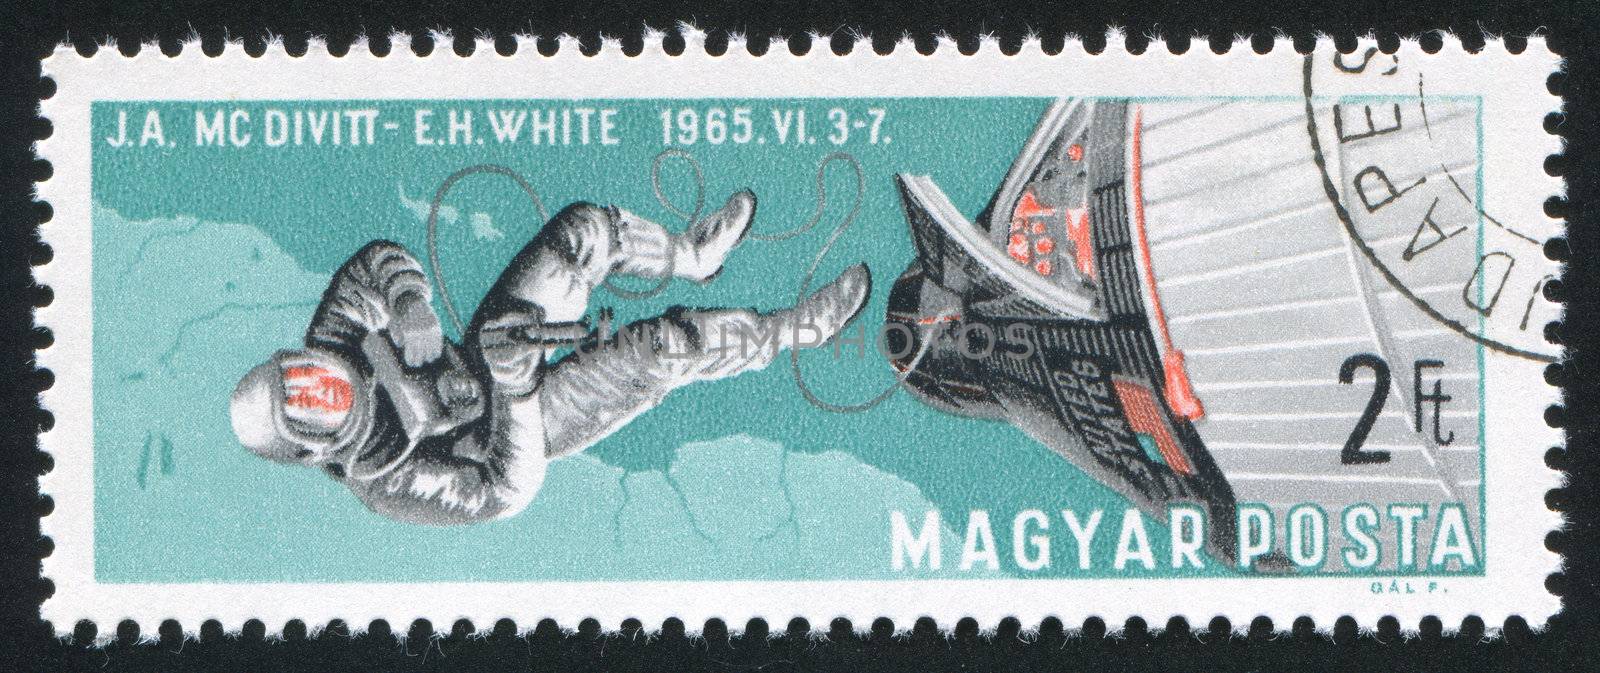 HUNGARY - CIRCA 1966: stamp printed by Hungary, shows Edward White walking in space, circa 1966